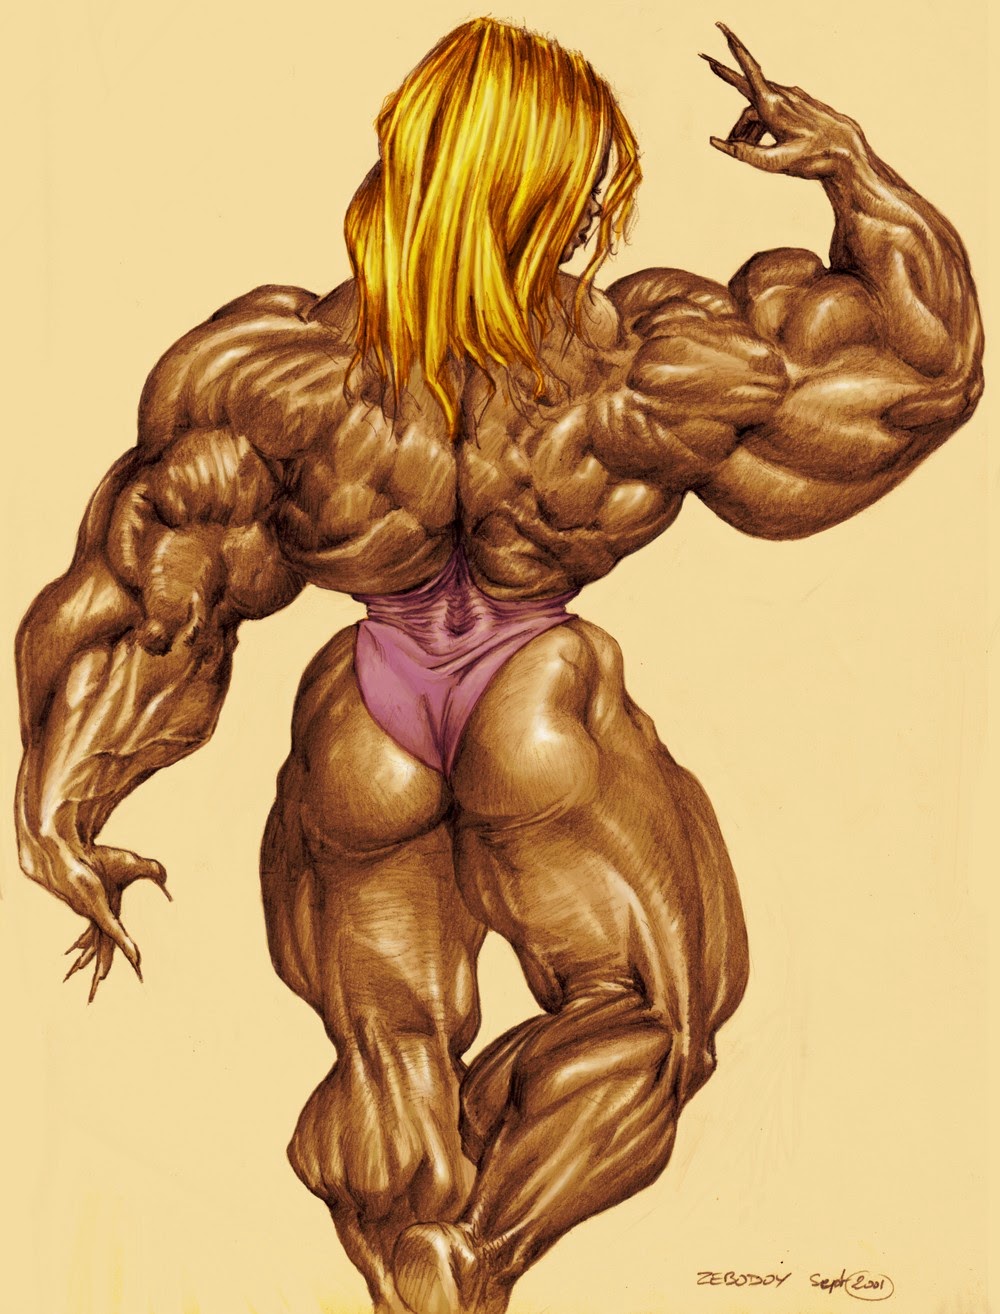 French artist Zebodoy is obsessed with muscles on women and draws them...